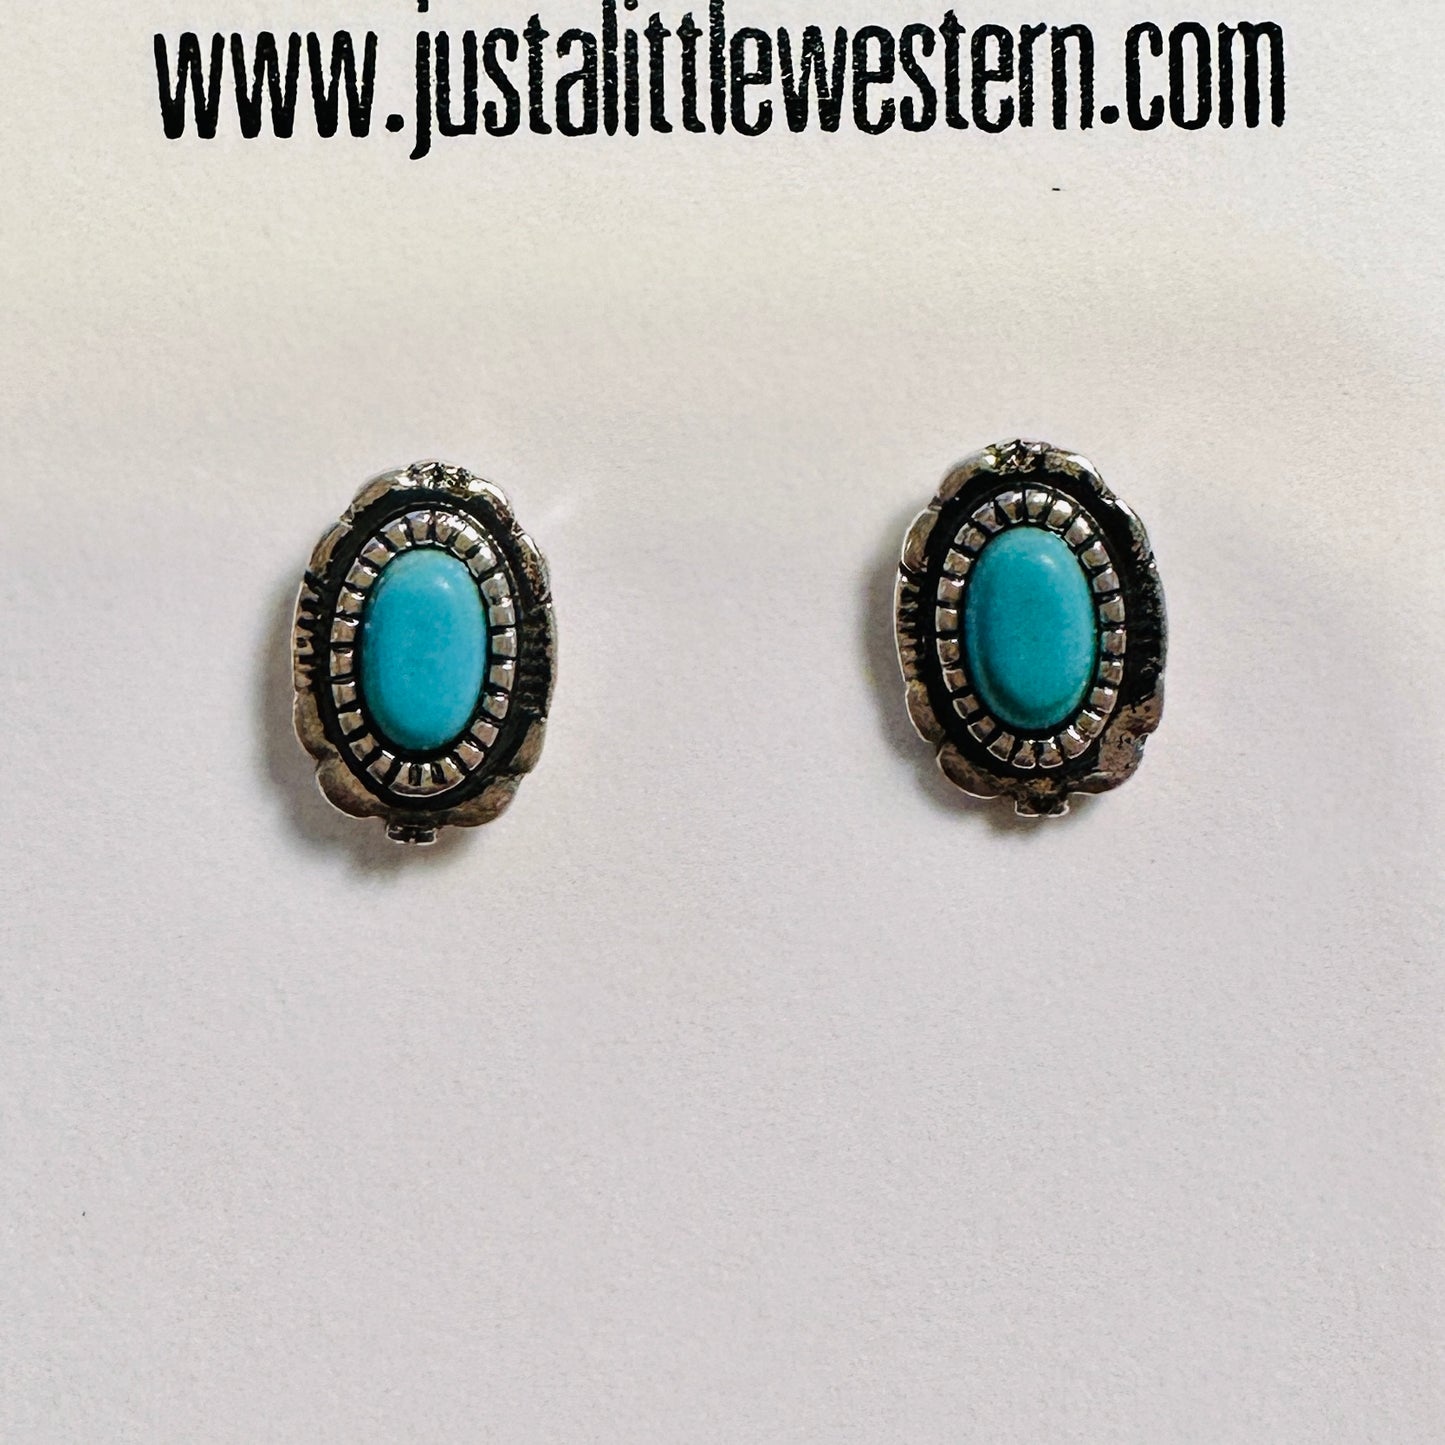 Tiny Oval Framed Turquoise Studs